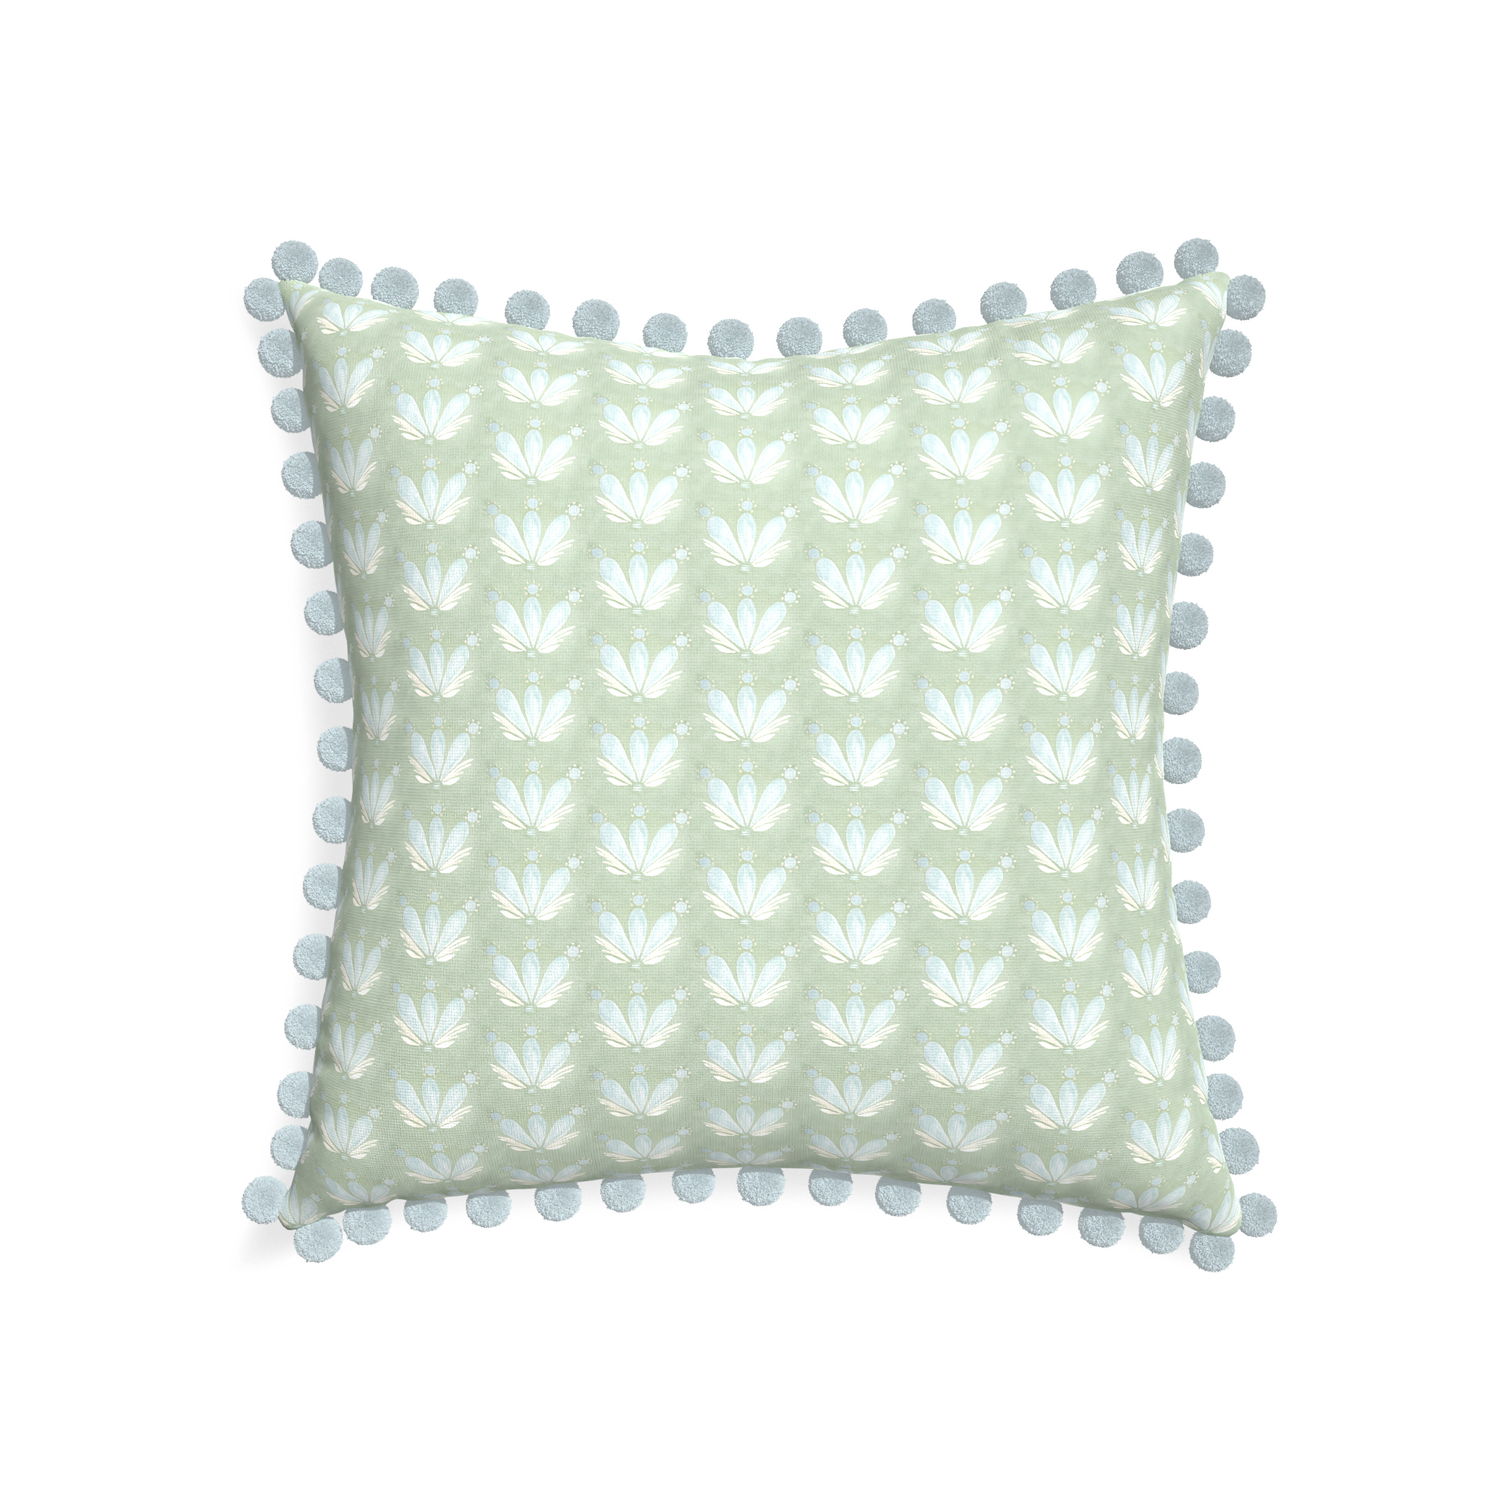 22-square serena sea salt custom blue & green floral drop repeatpillow with powder pom pom on white background